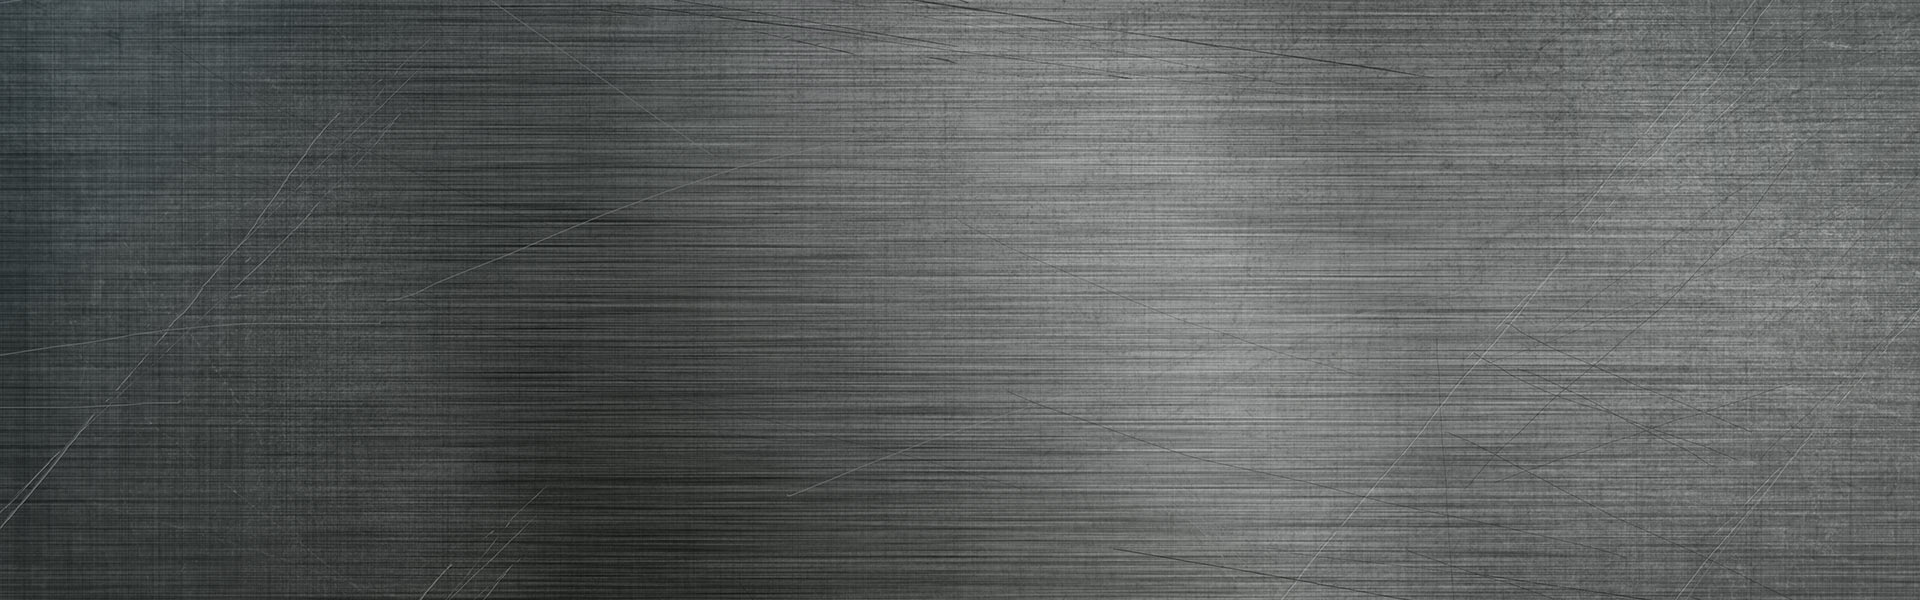 This image shows a wide, textured metallic surface with scratches and a brushed appearance in a monochromatic, dark grey color scheme, conveying an industrial feel.